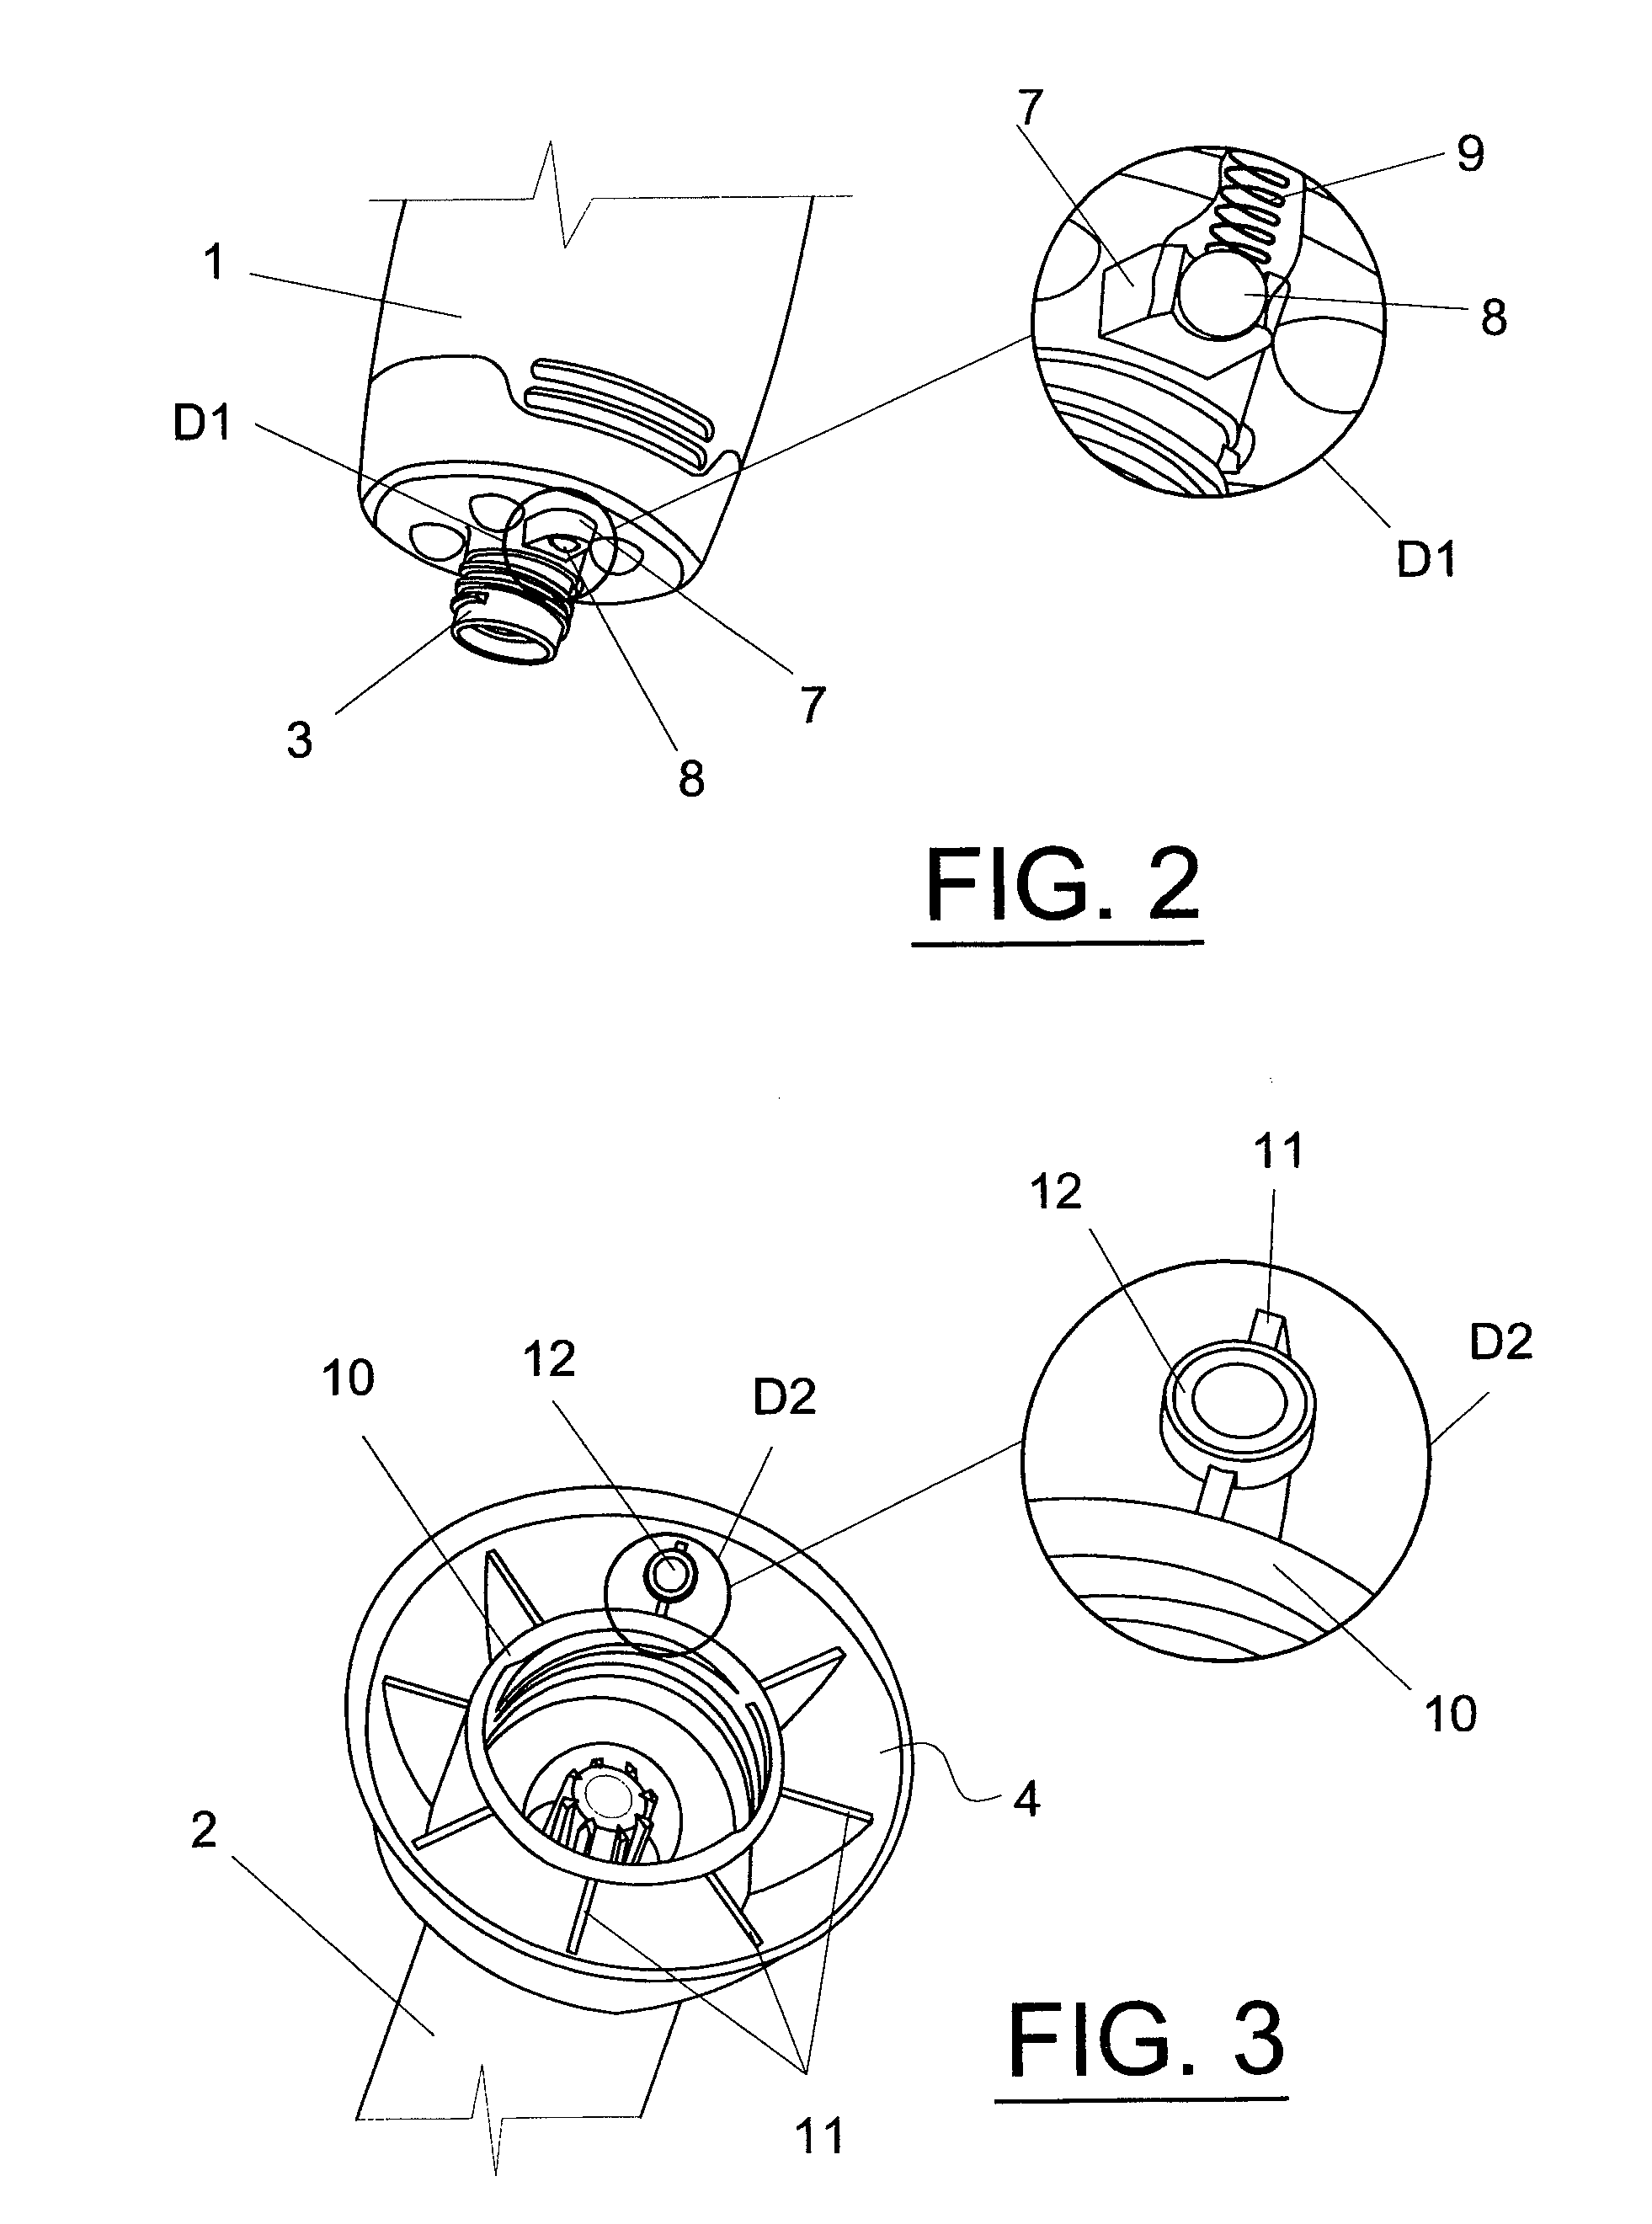 Releasable Coupling Device Between a Tool Shank and a Motor Assembly in Hand-Held Blenders